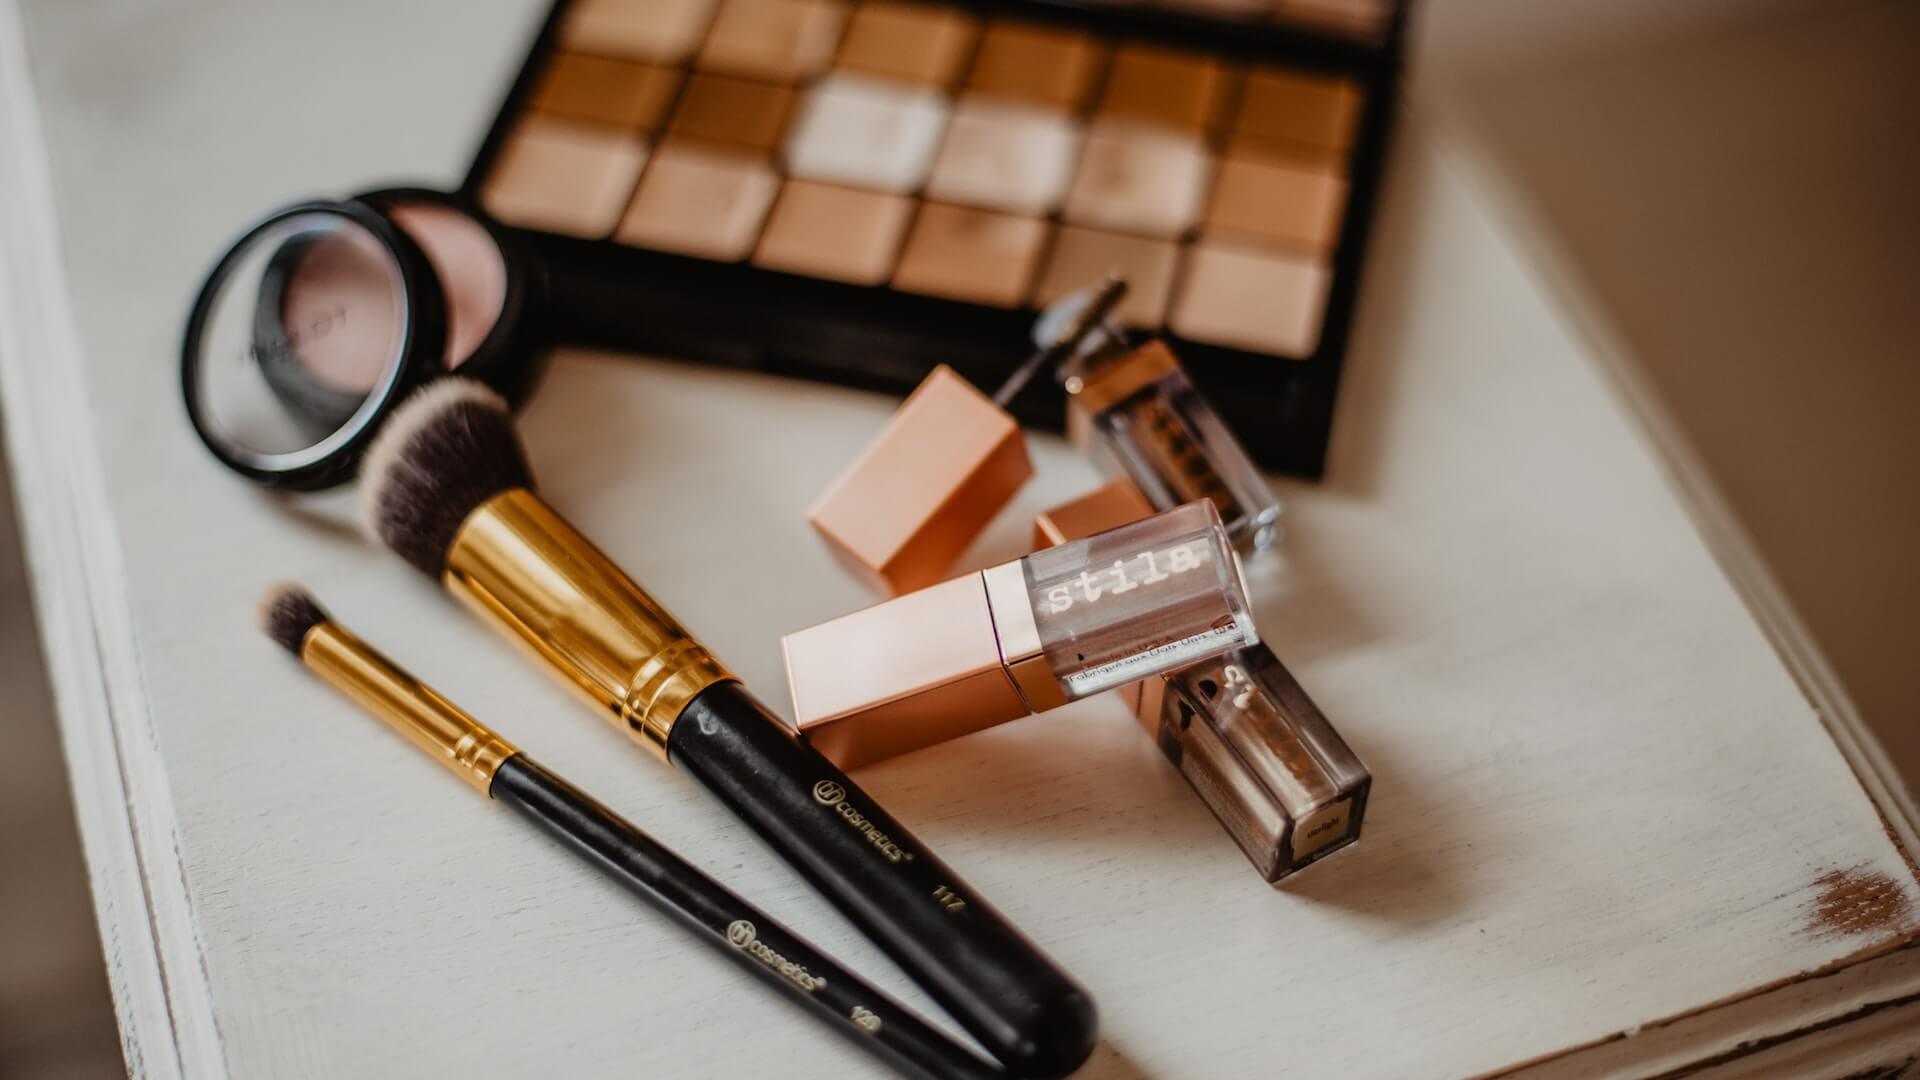 How top cosmetic brands leverage UGC to improve eCommerce performance